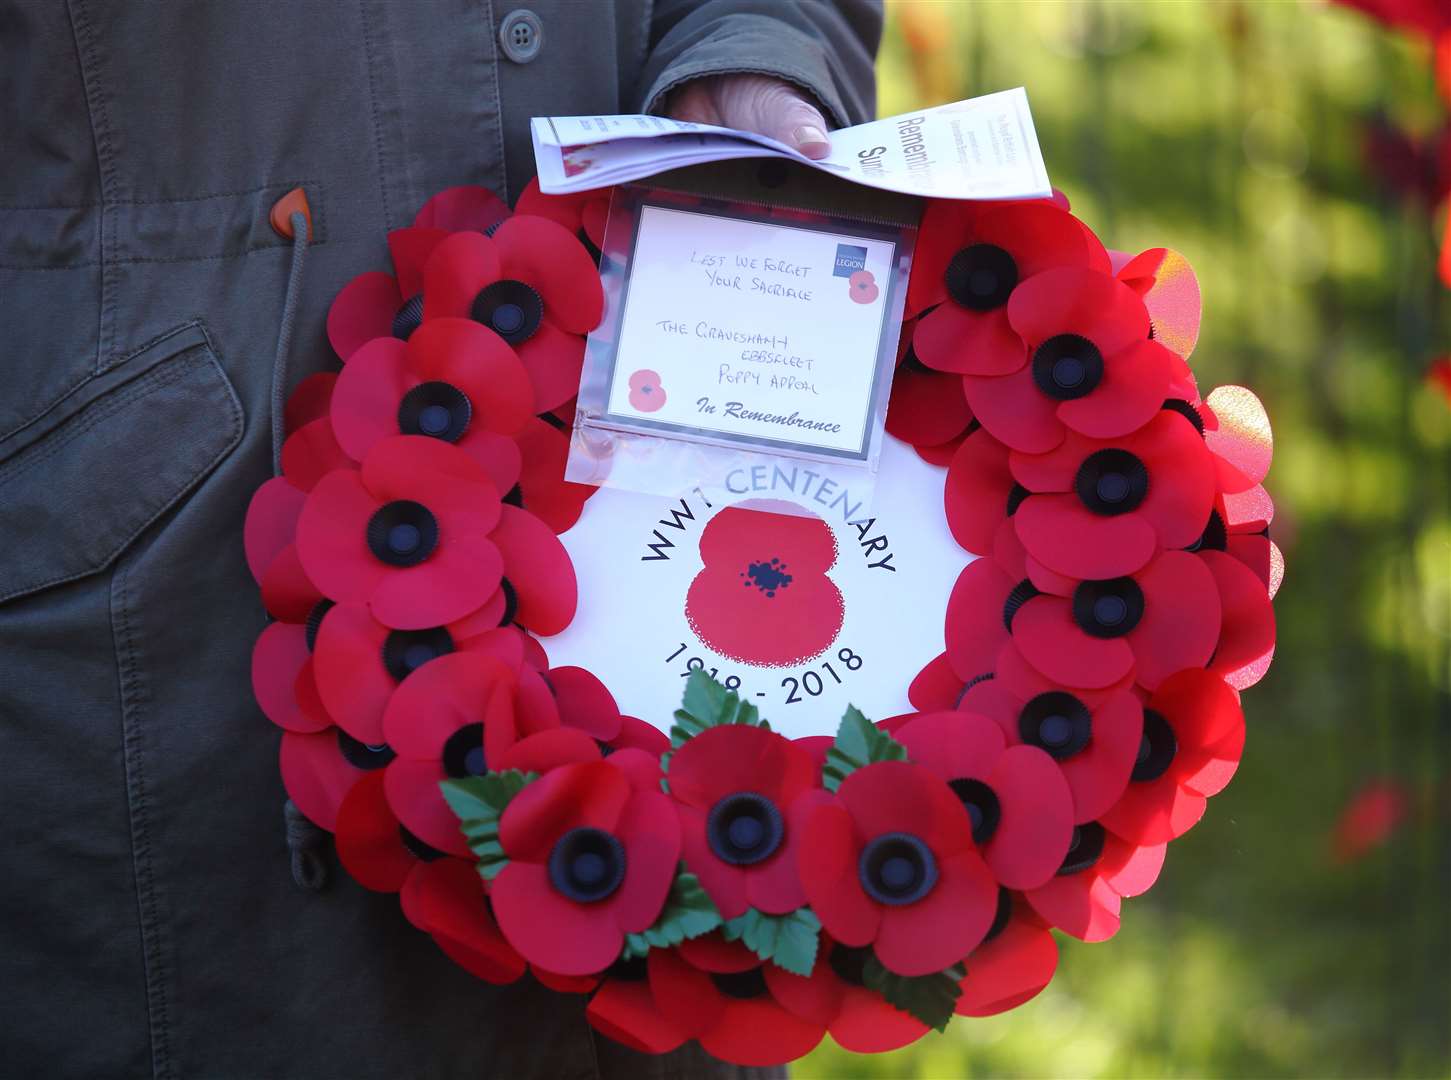 Remembrance Day events are being staged across Kent